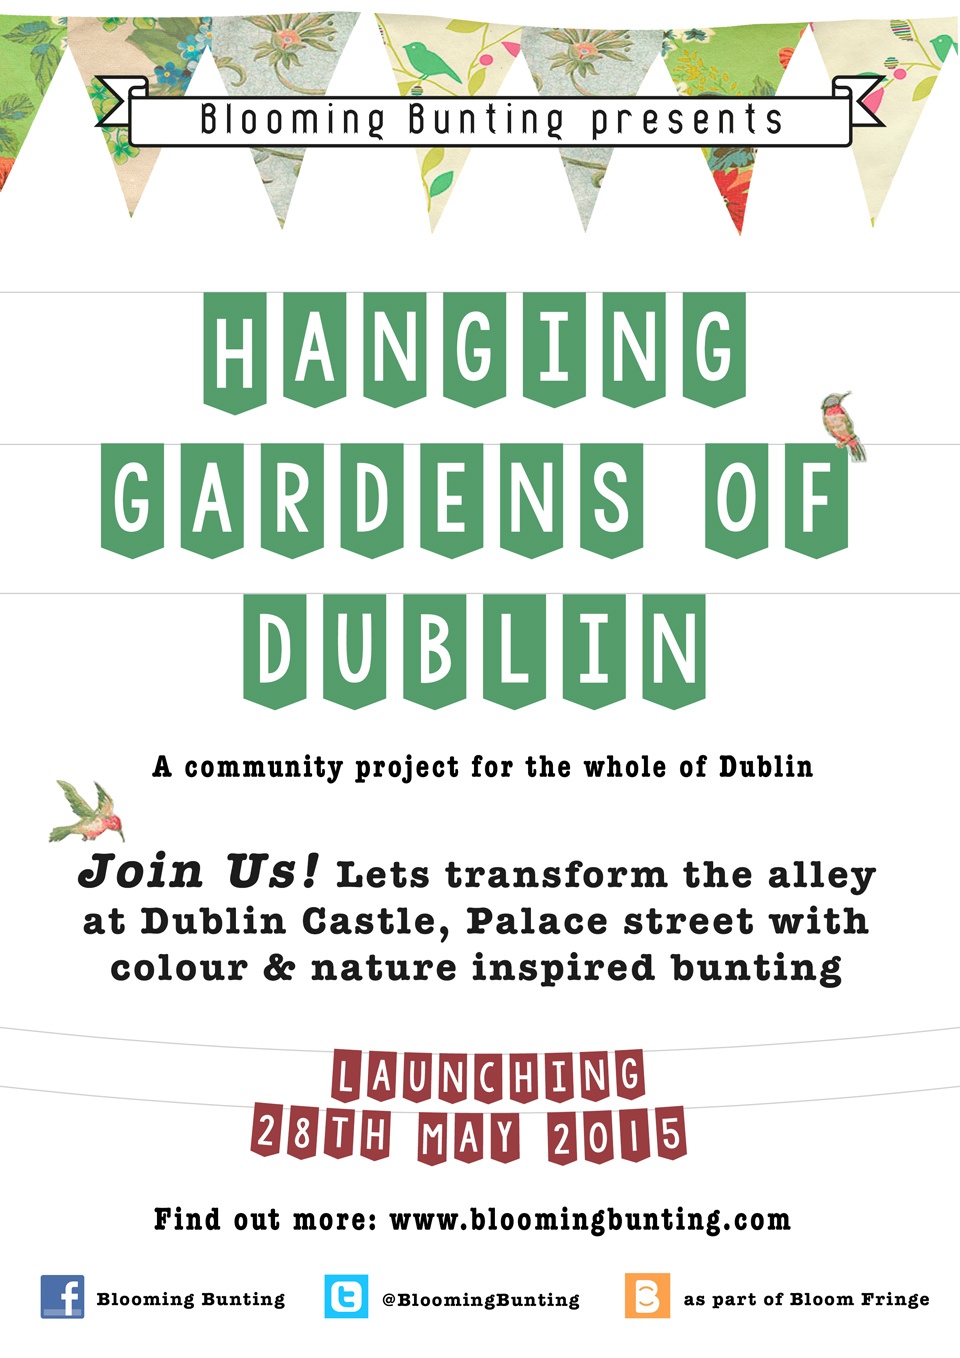 The Hanging Gardens of Dublin_poster